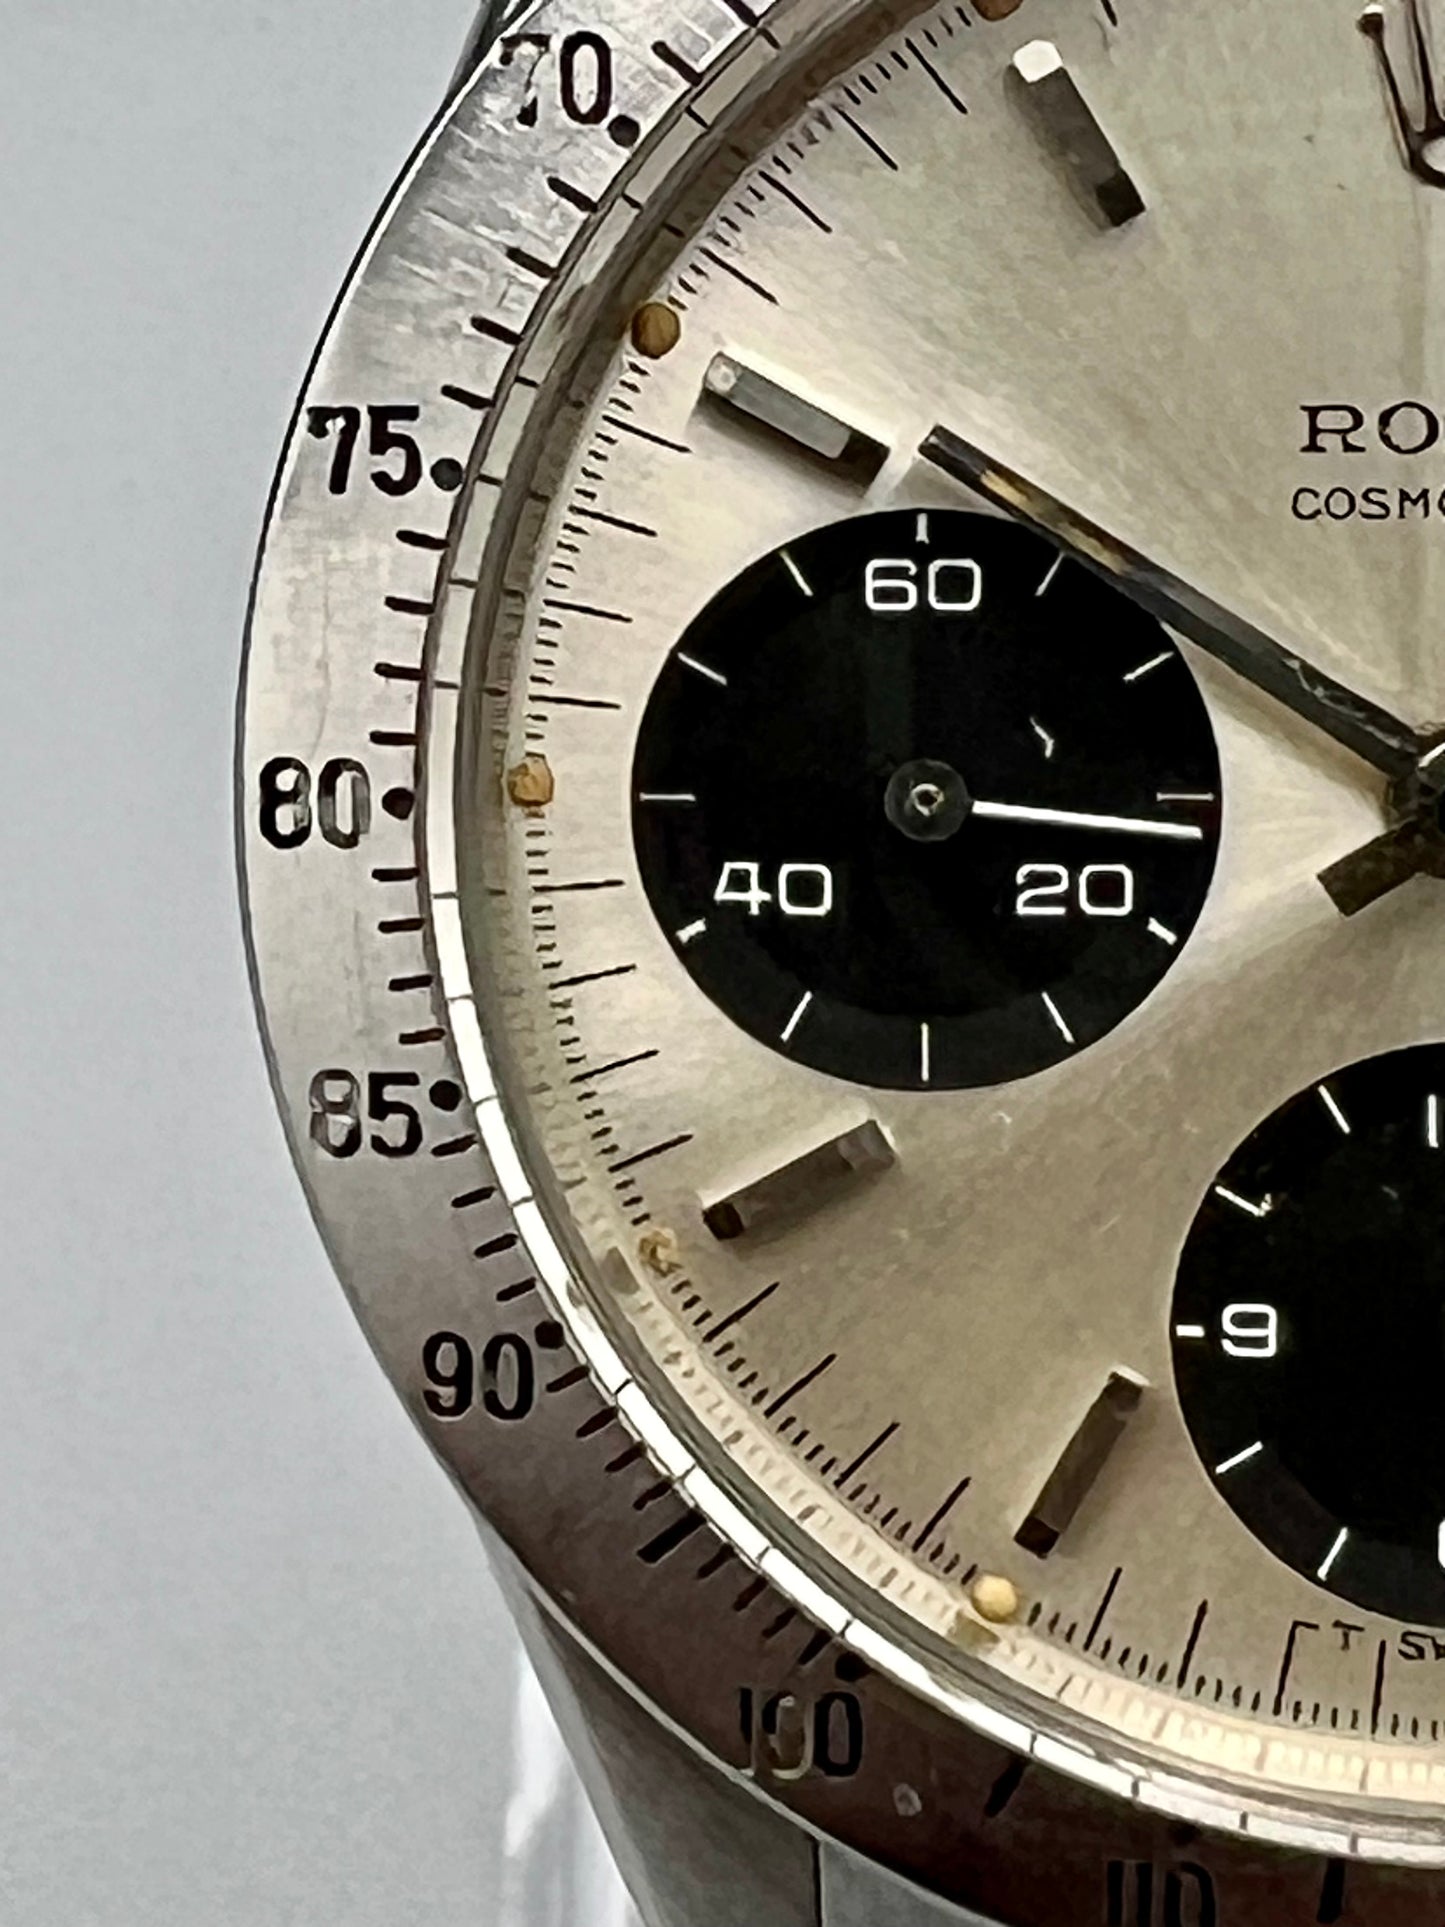 Rolex Ref 6239 First Series Cosmograph Daytona, Silver Dial, All Original, Warranty Papers and Box, 1964